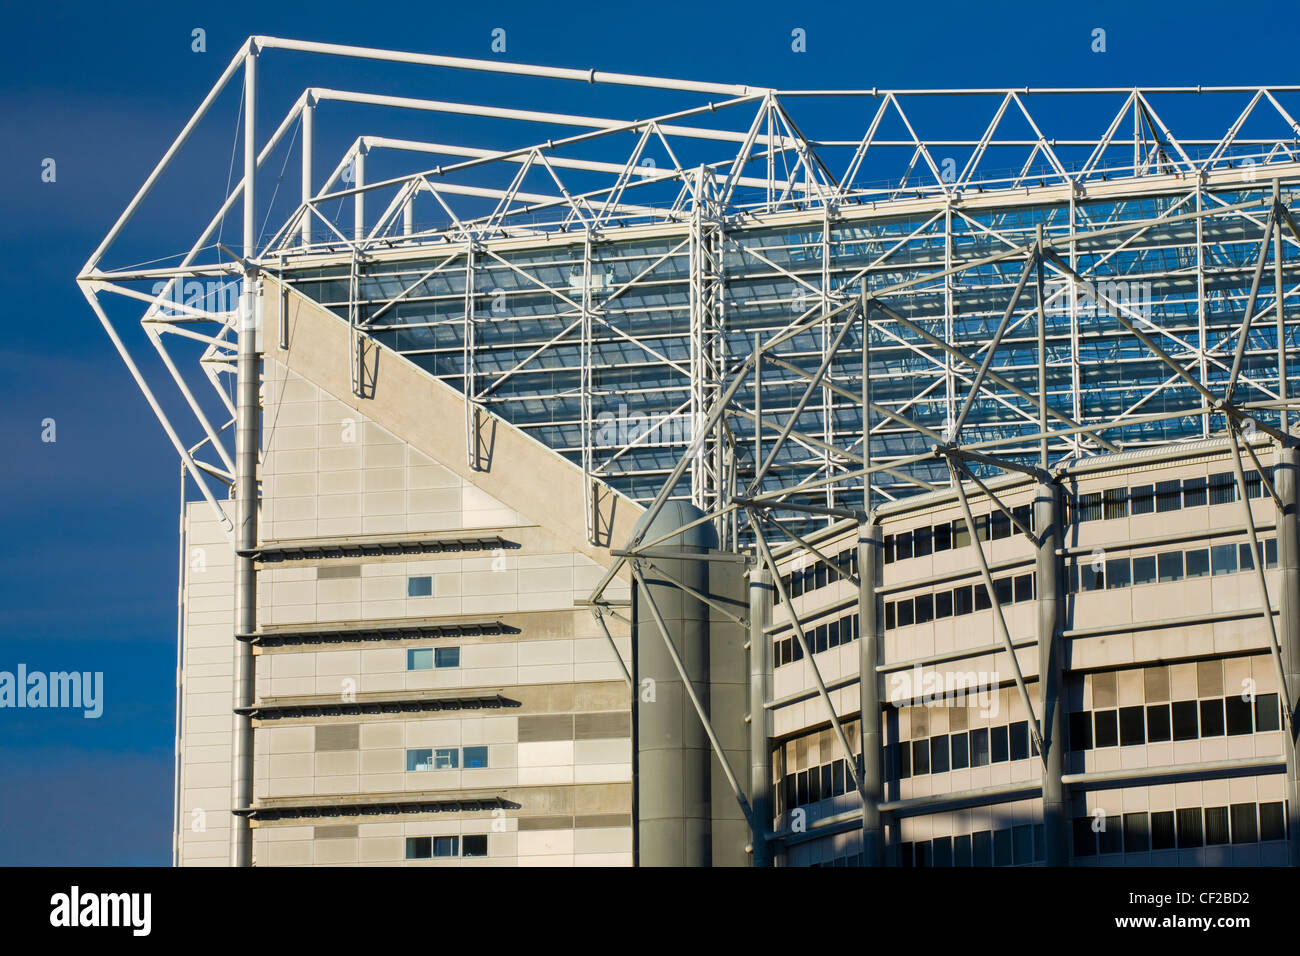 St James's Park, home to Newcastle United FC. The cantilever roof is among one of the largest to be found in Europe. Stock Photo